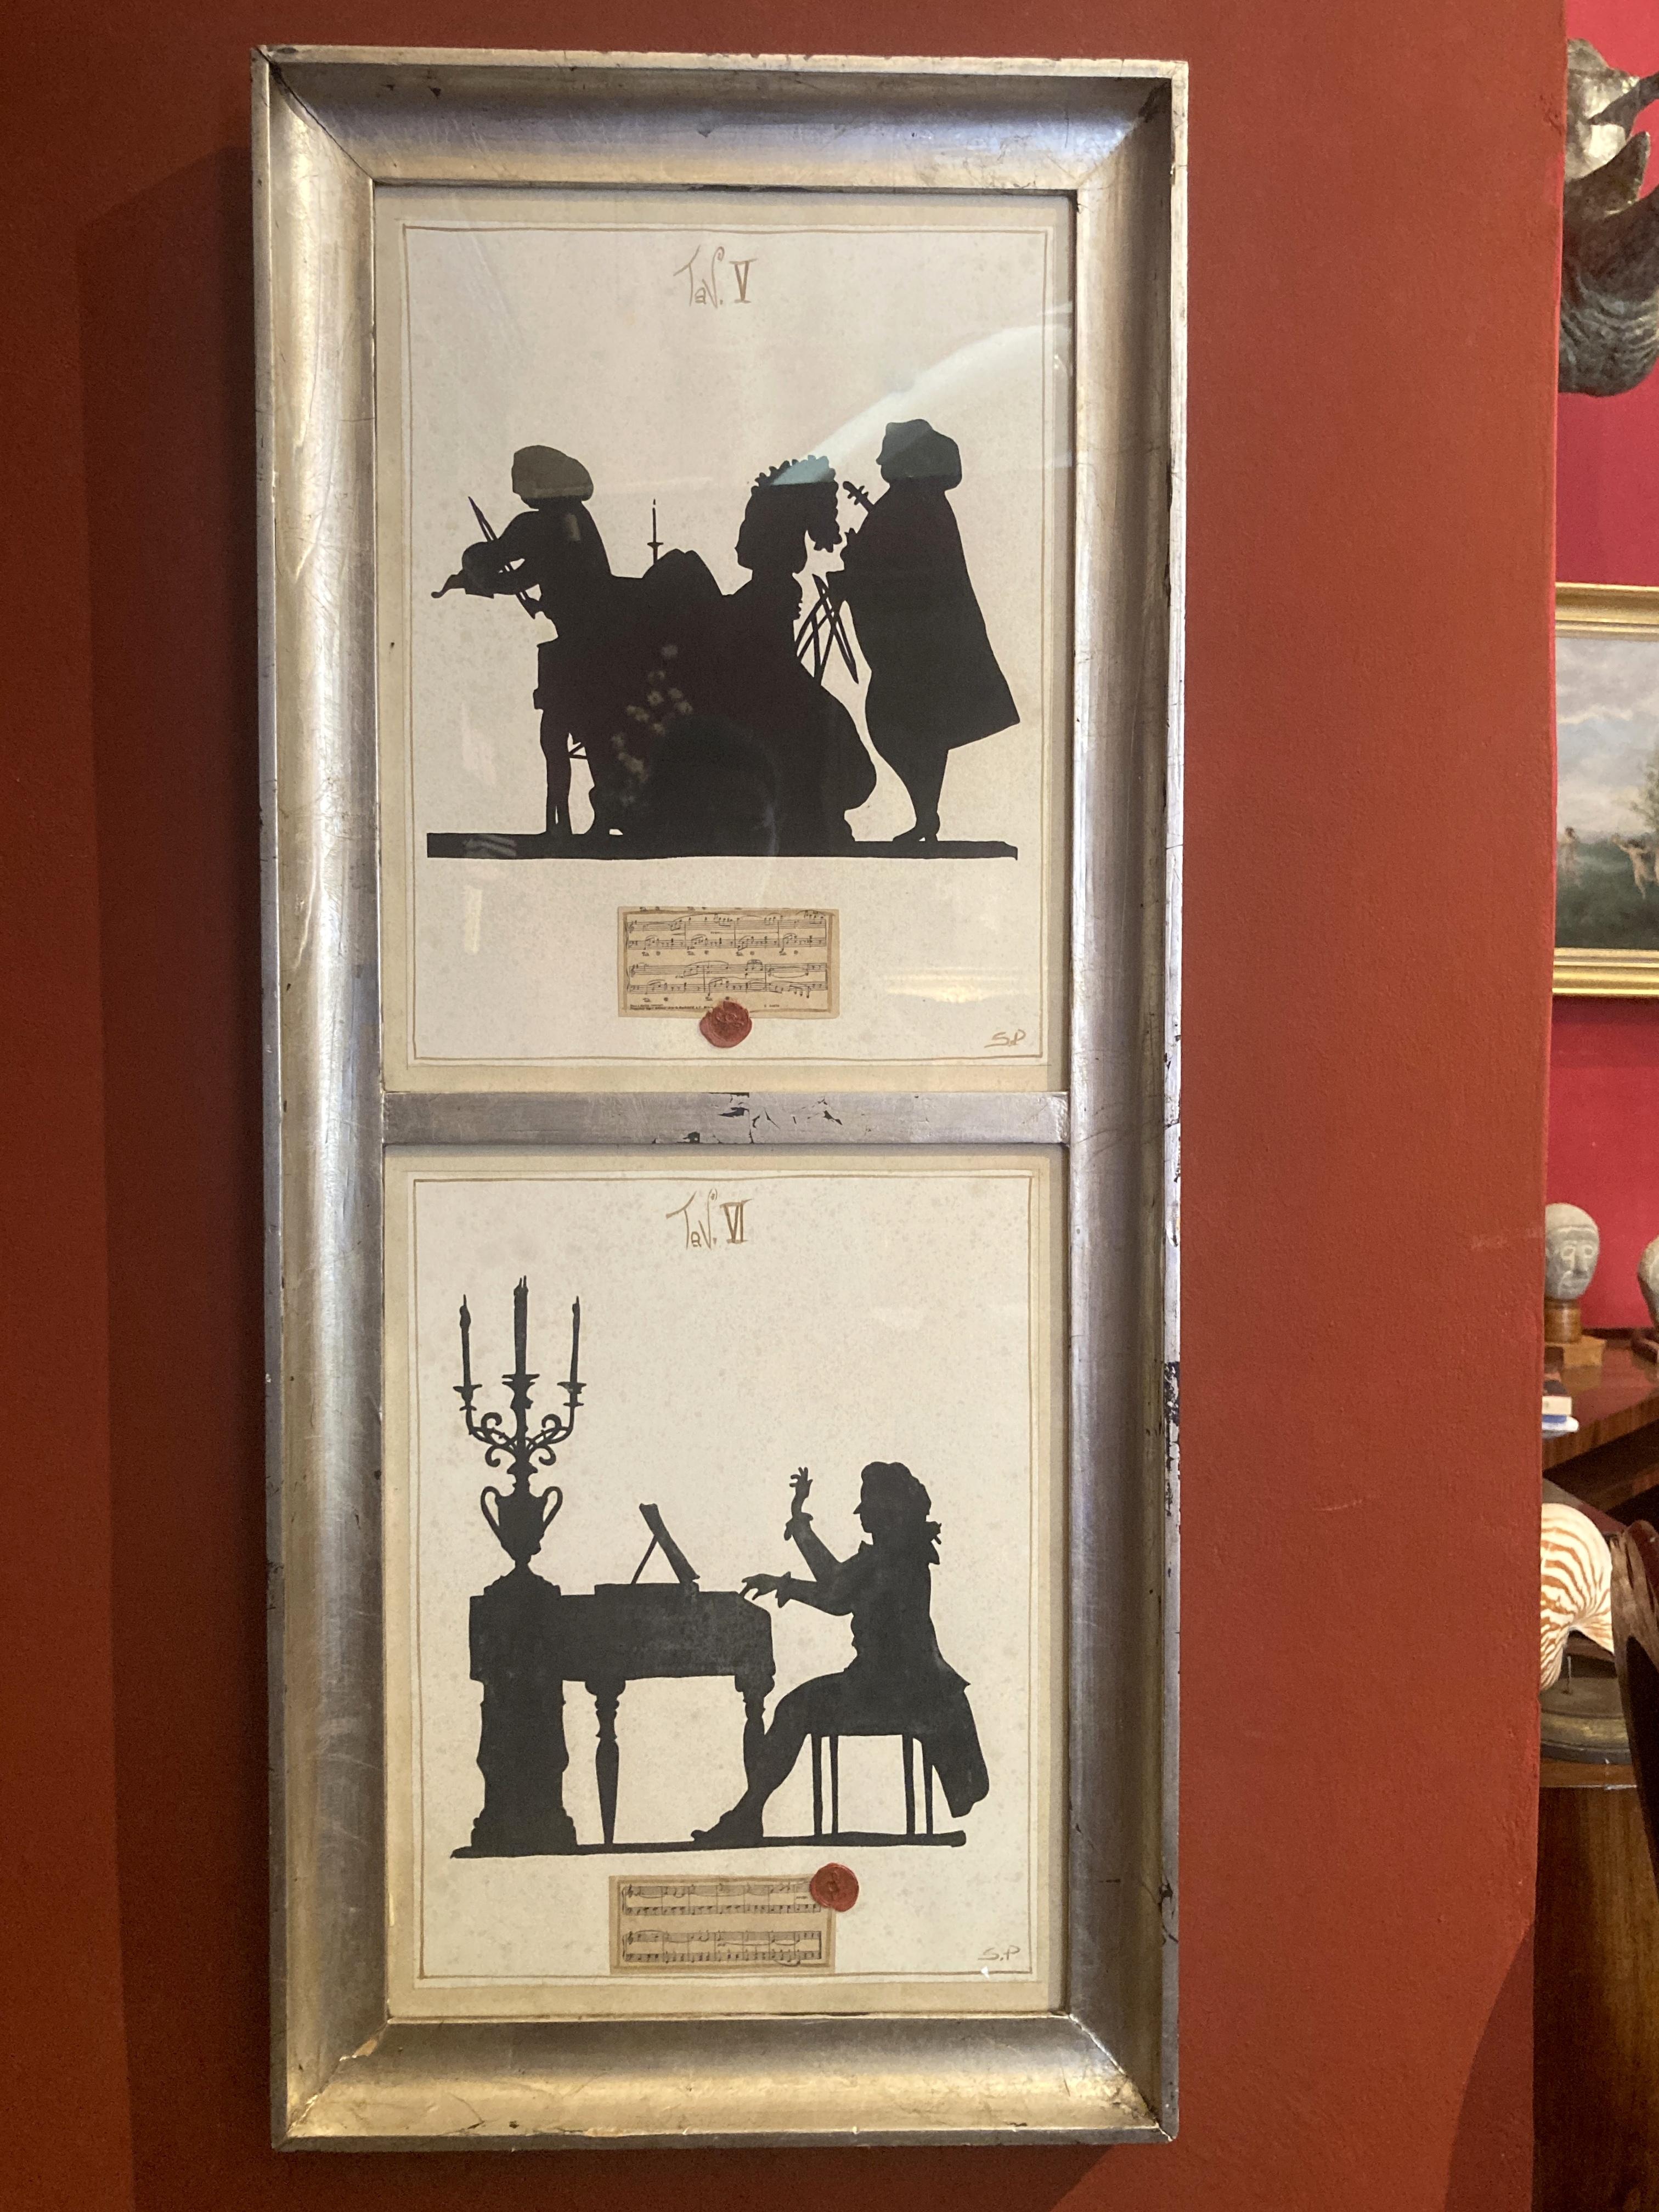 Italian Vintage Musicians Silhouettes Mixed Media Paintings on Paper  - Modern Mixed Media Art by Unknown